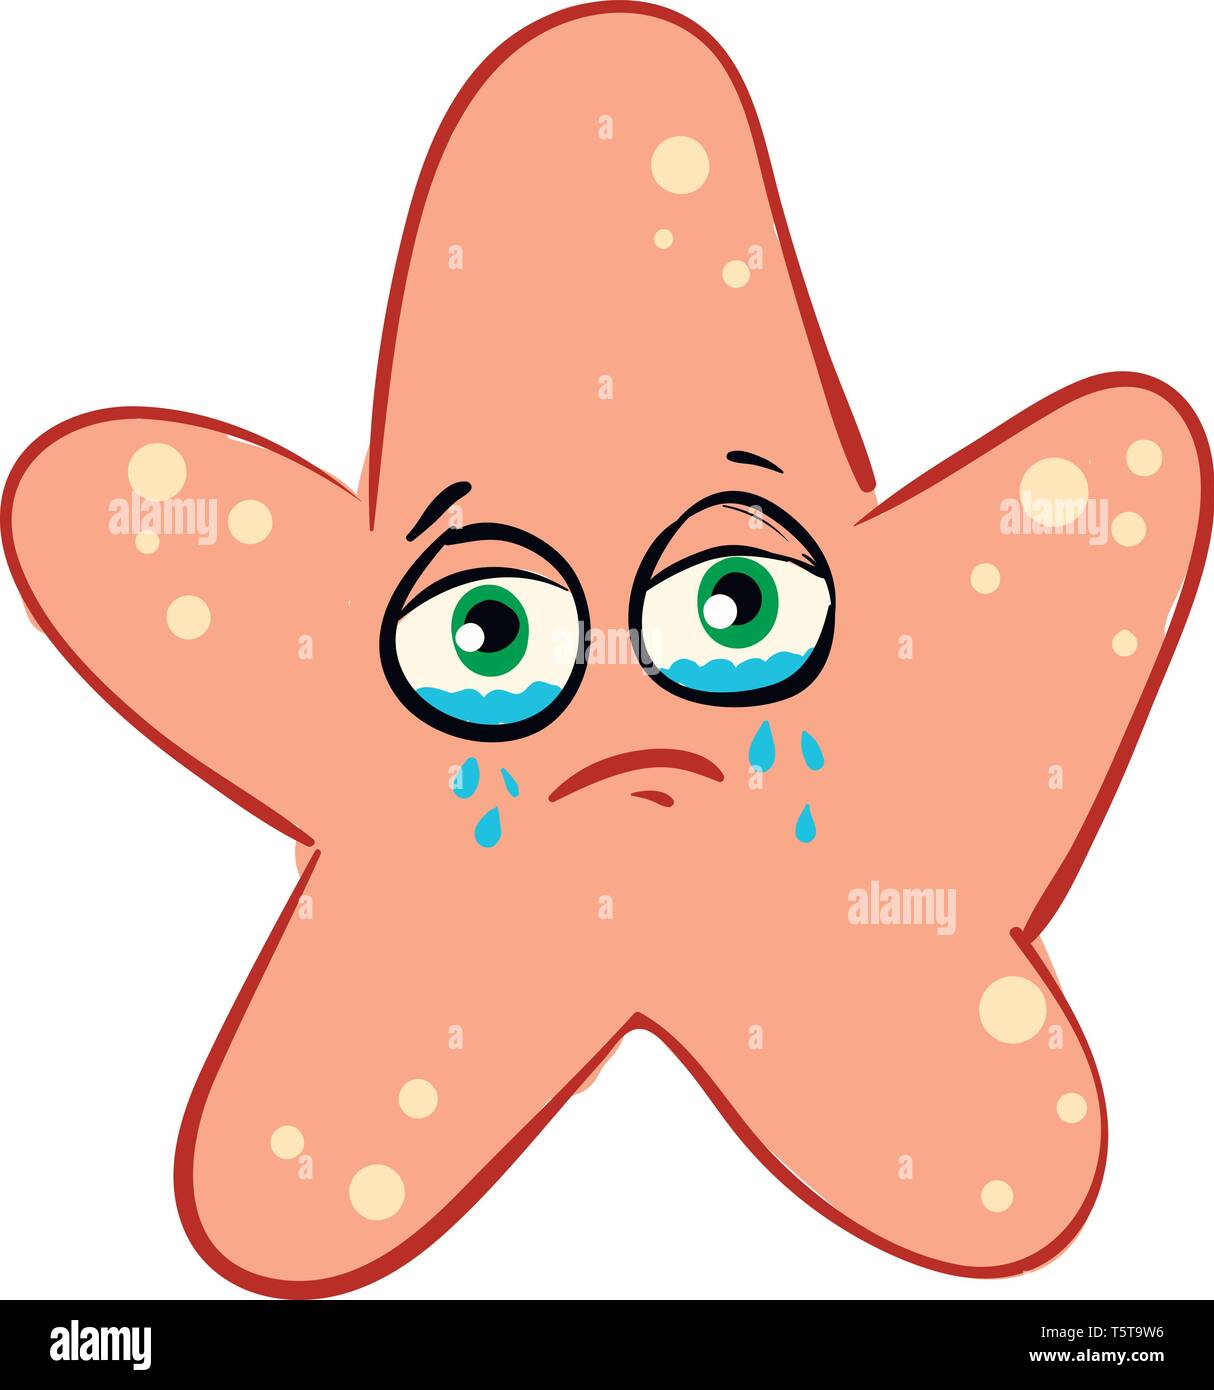 Sad crying sea star vector illustration on white background. Stock Vector